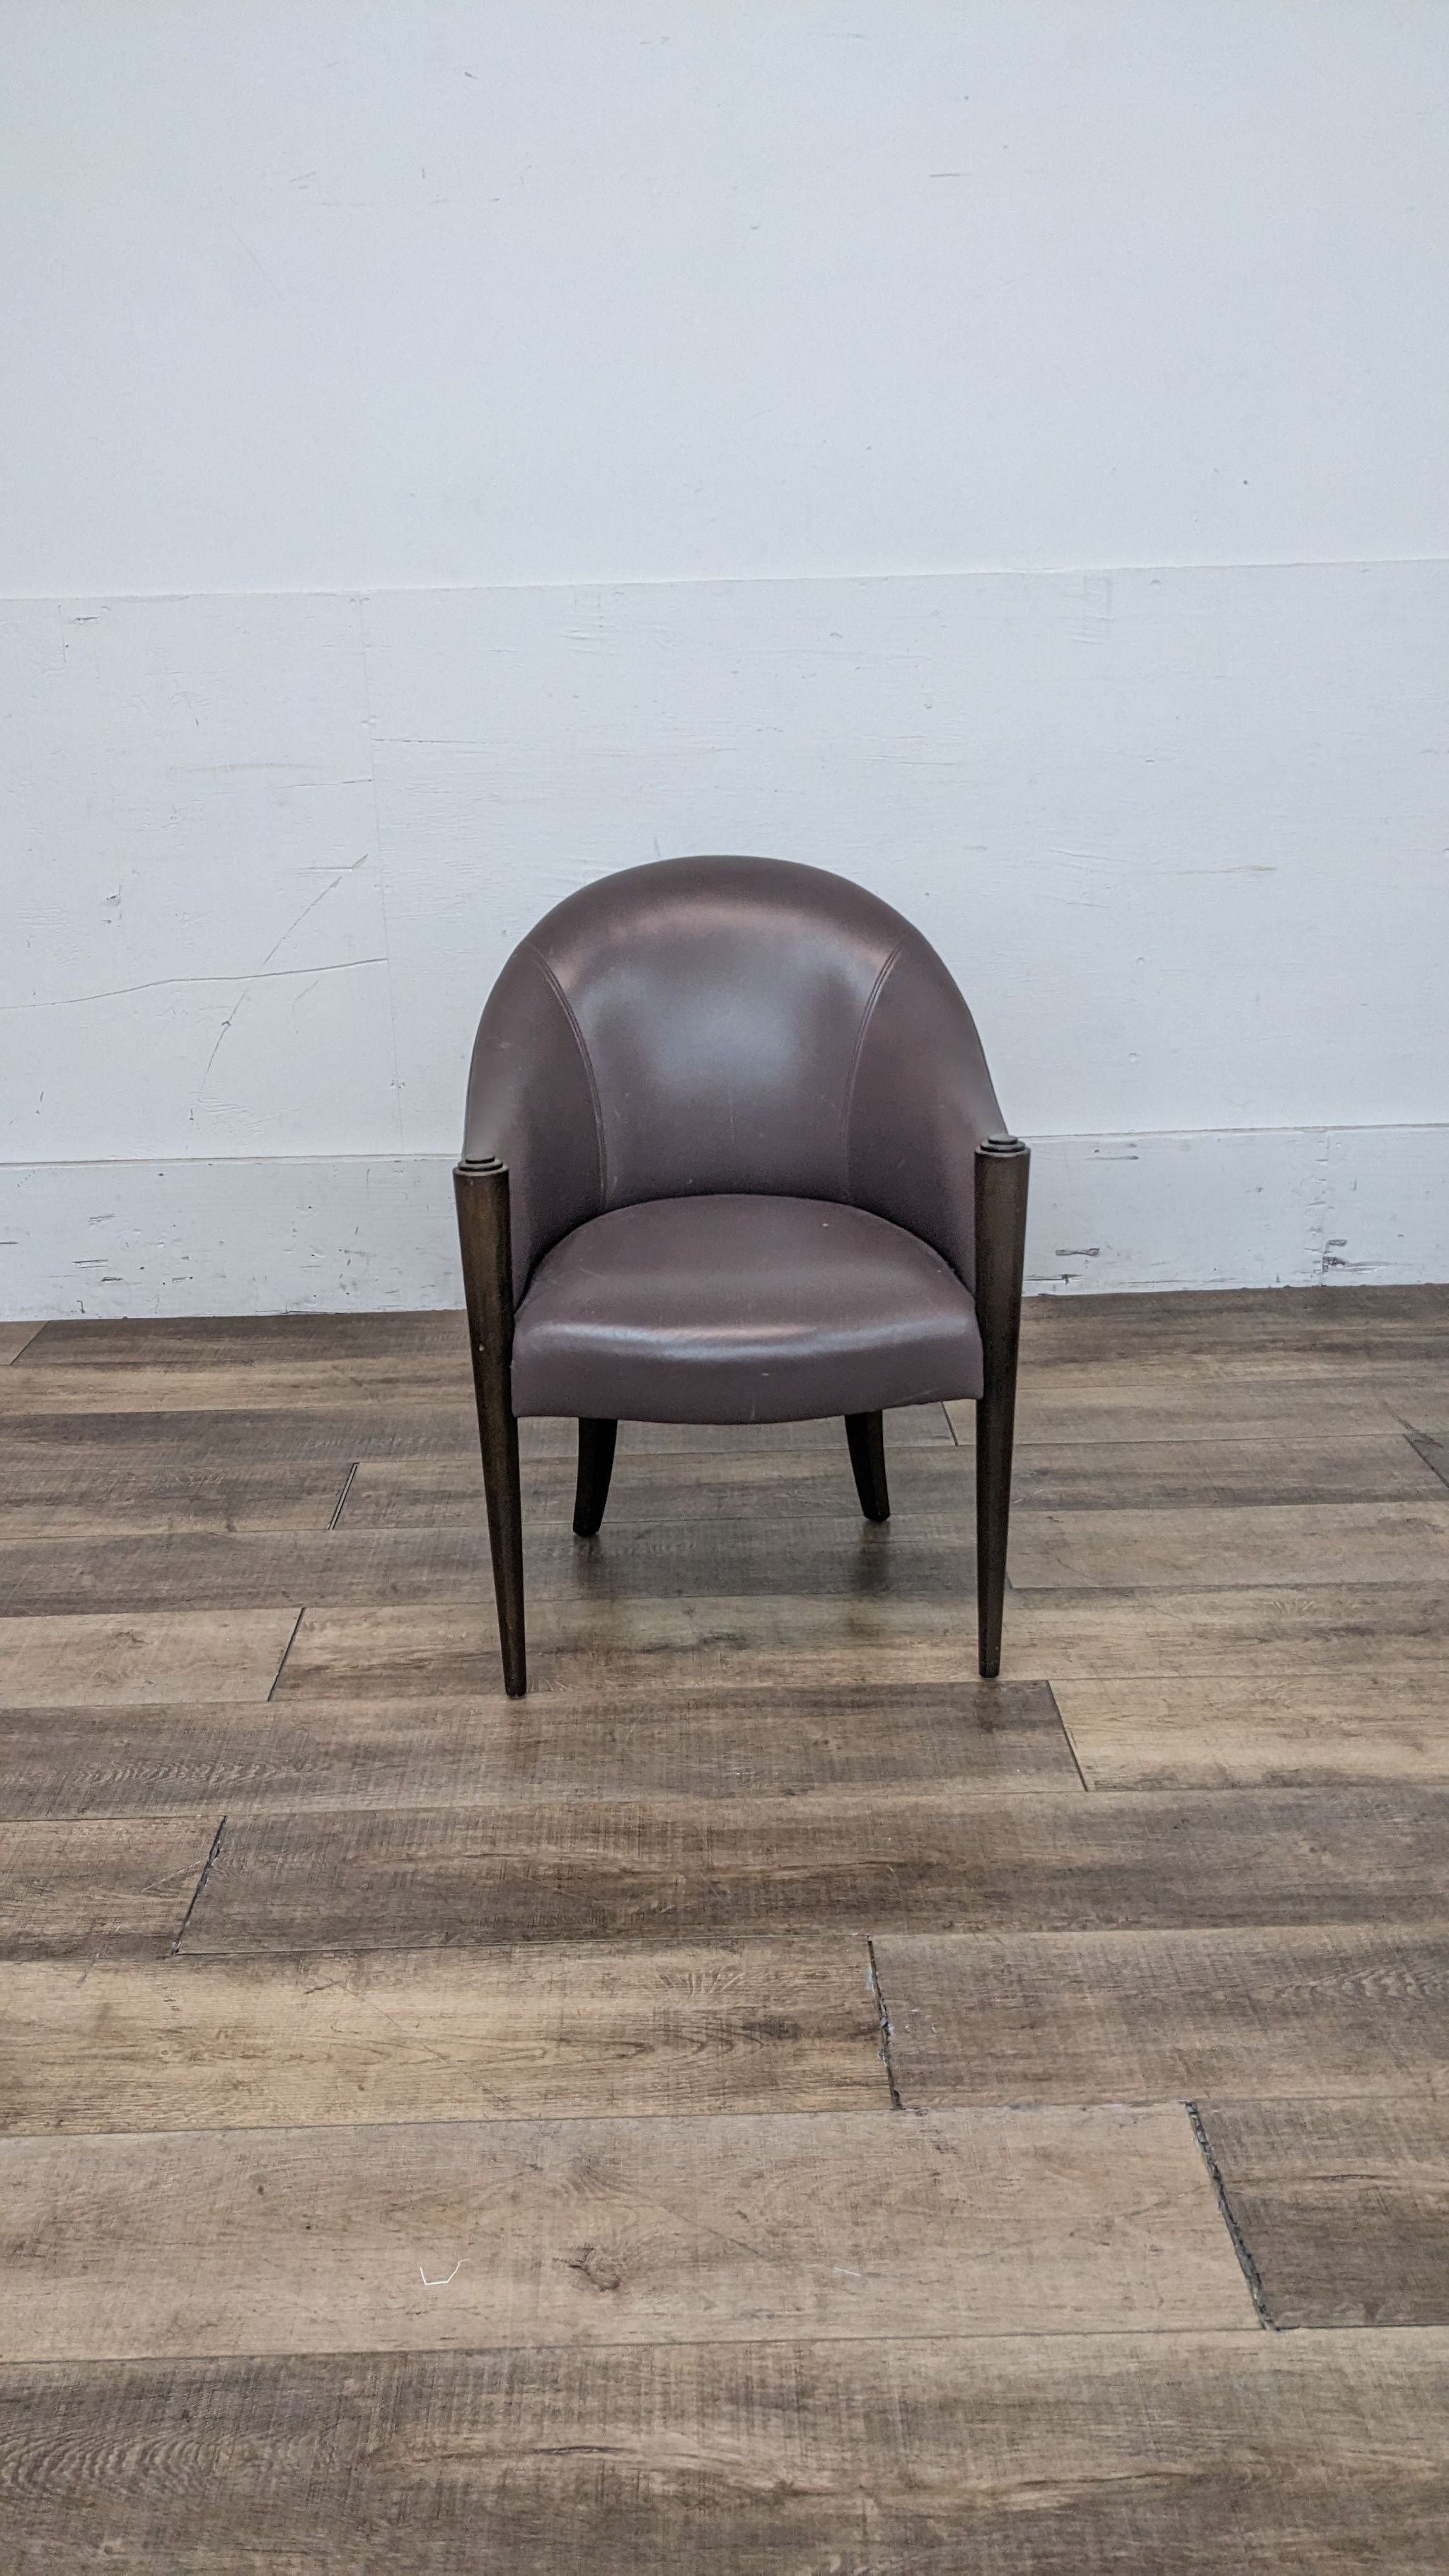 Donghia leather tub back chair with rounded back and tapered legs, on a wooden floor against a white wall.